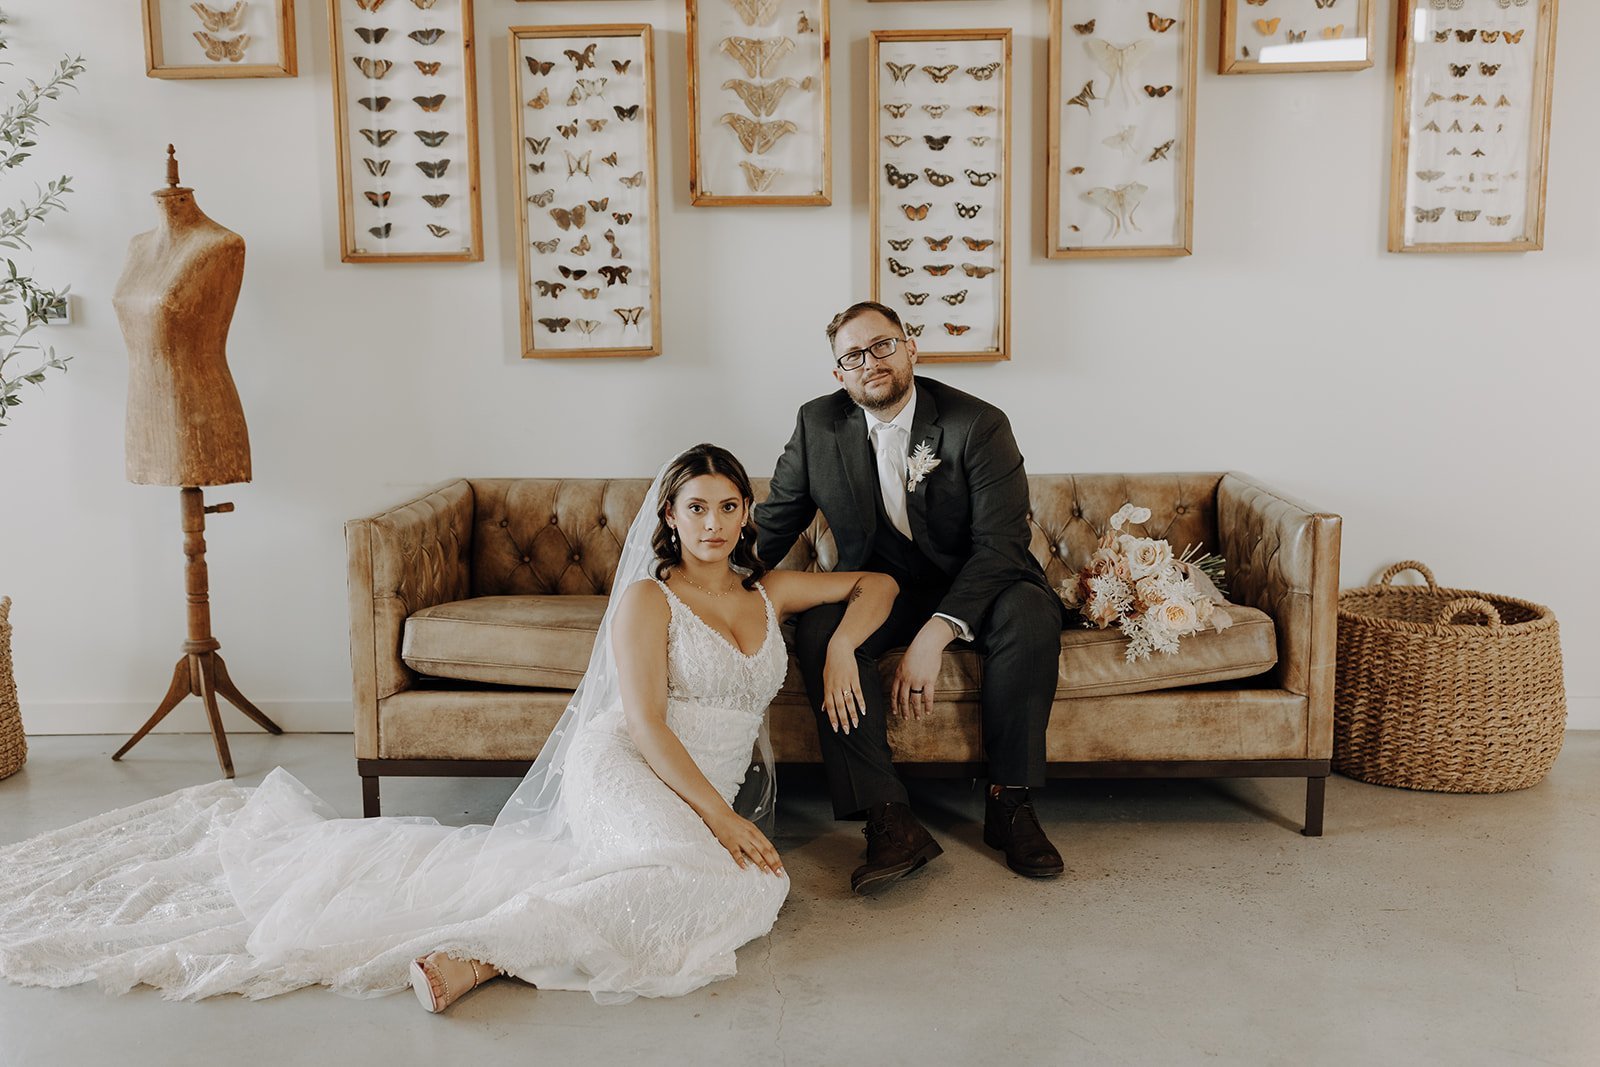 Groom sitting on brown leather couch while bride sits on the floor, posing for couple photos